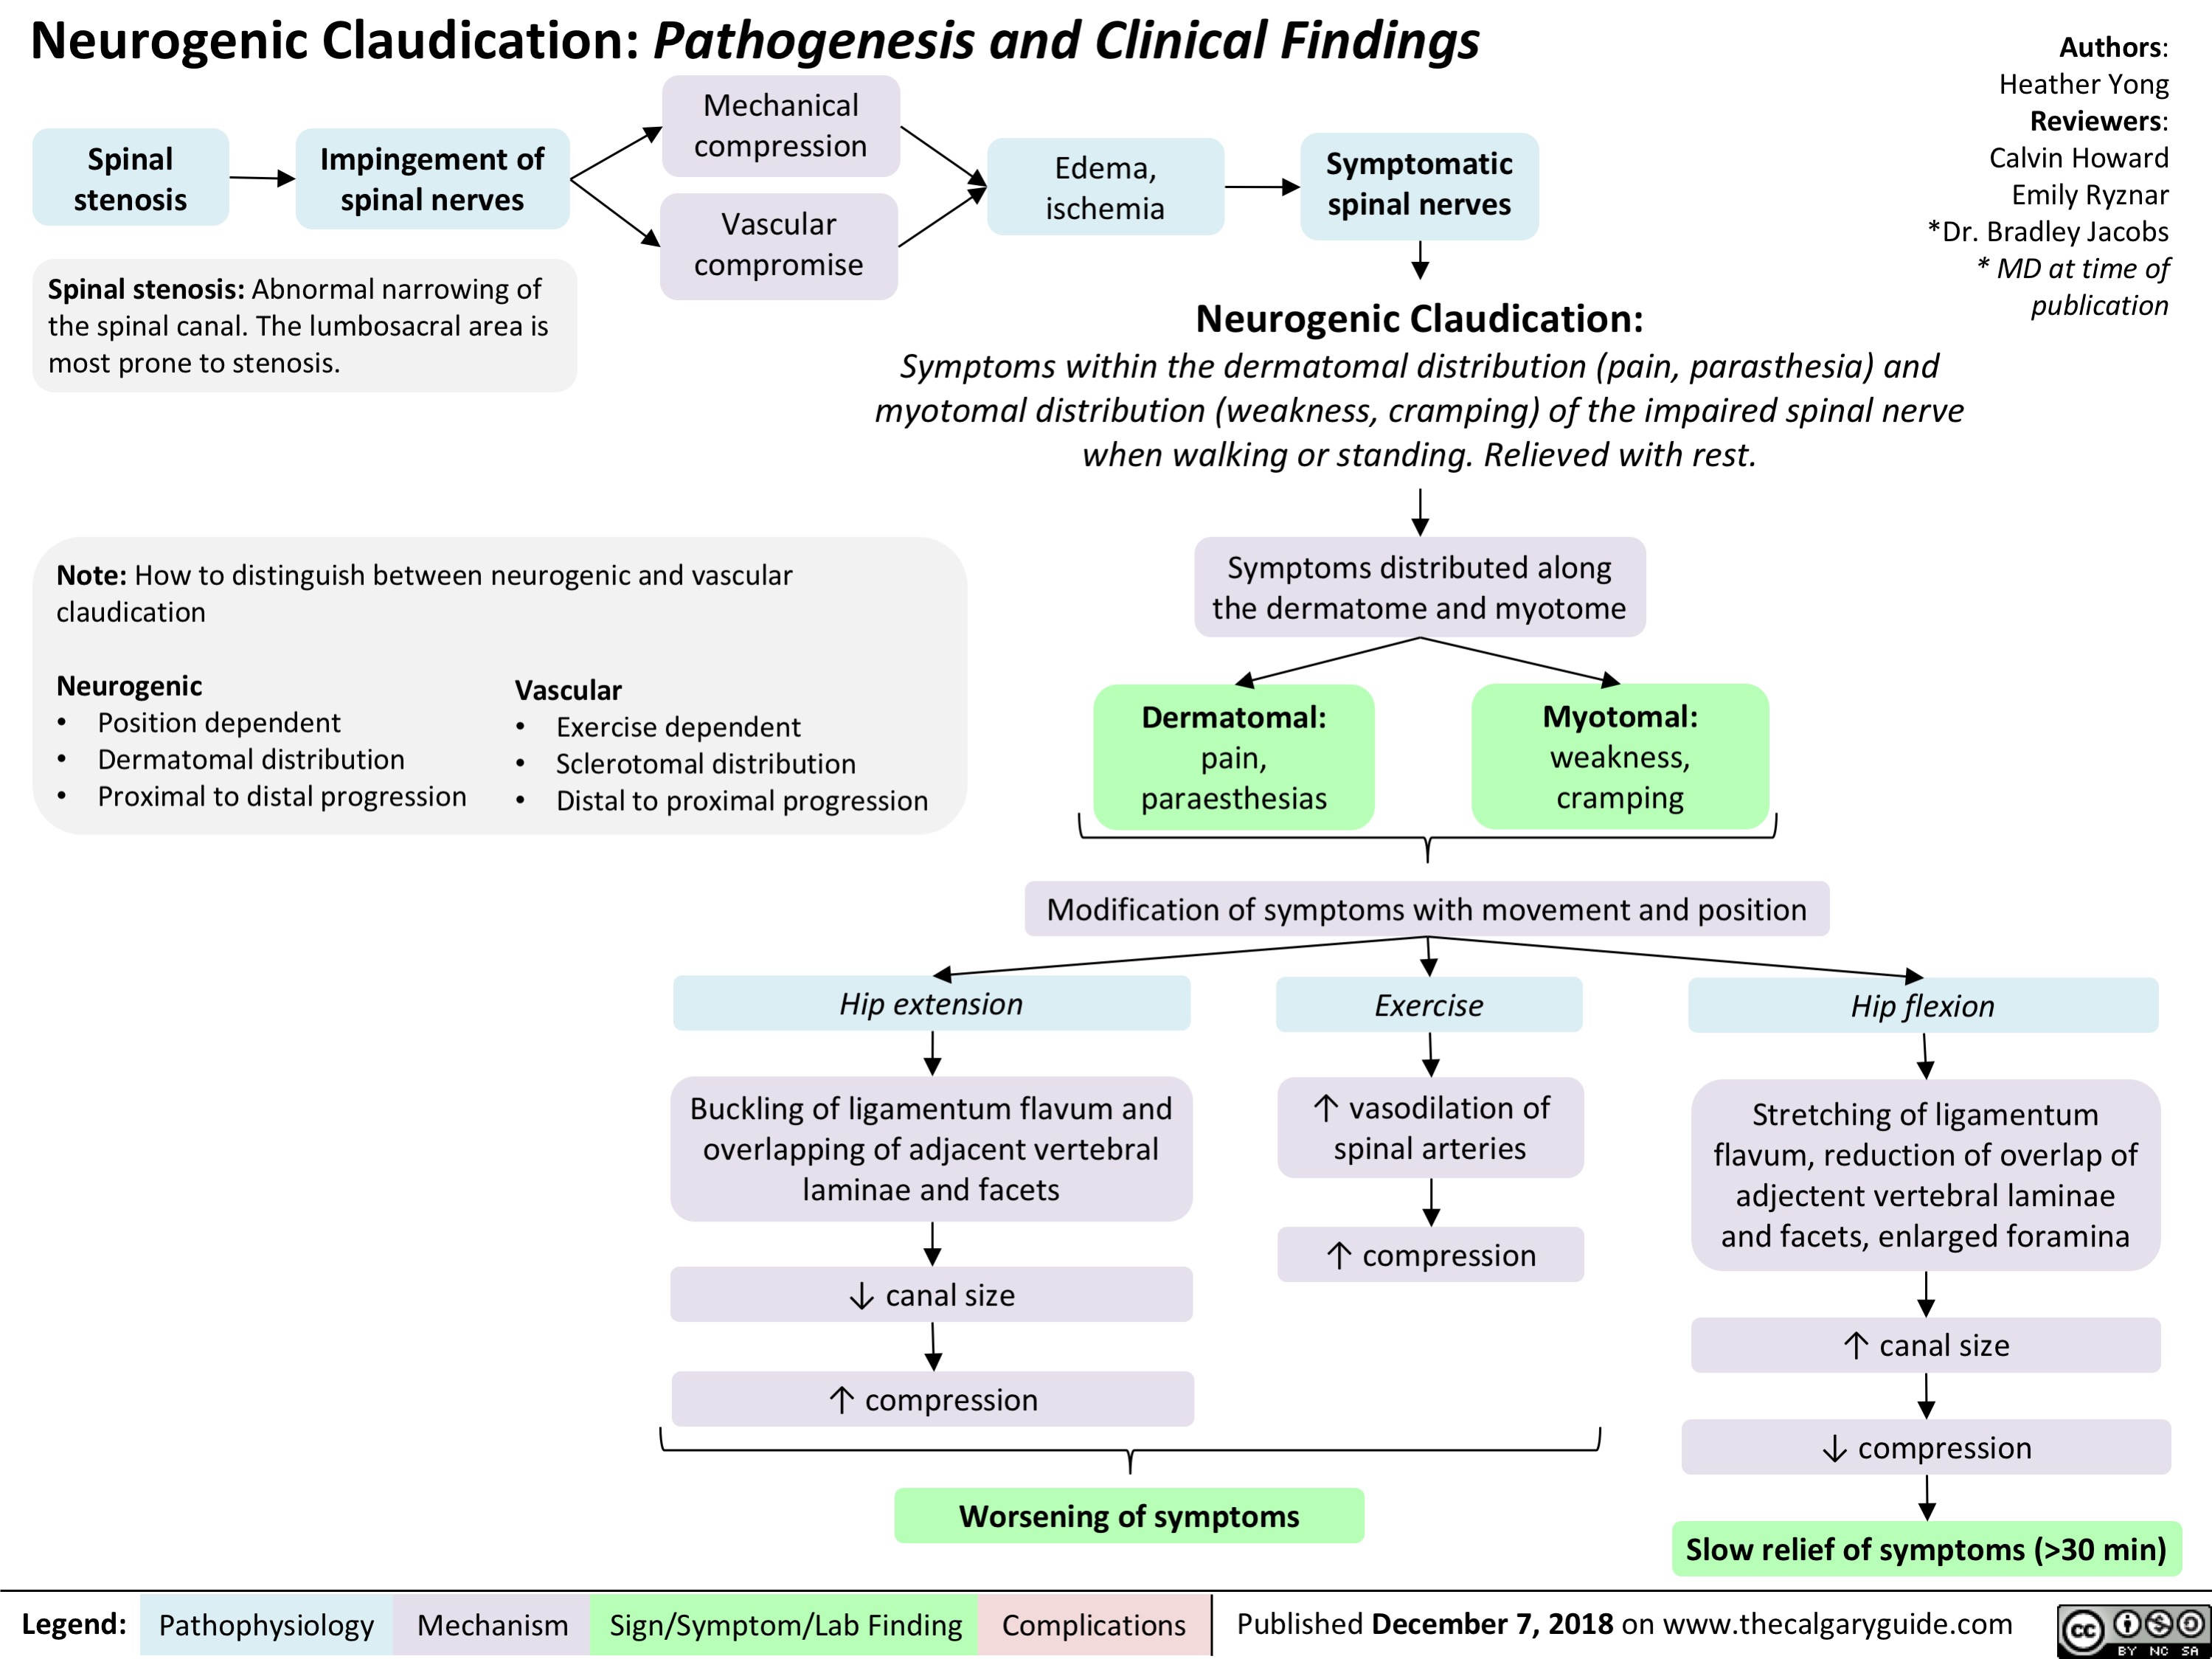 What is neurogenic claudication in medical terms?